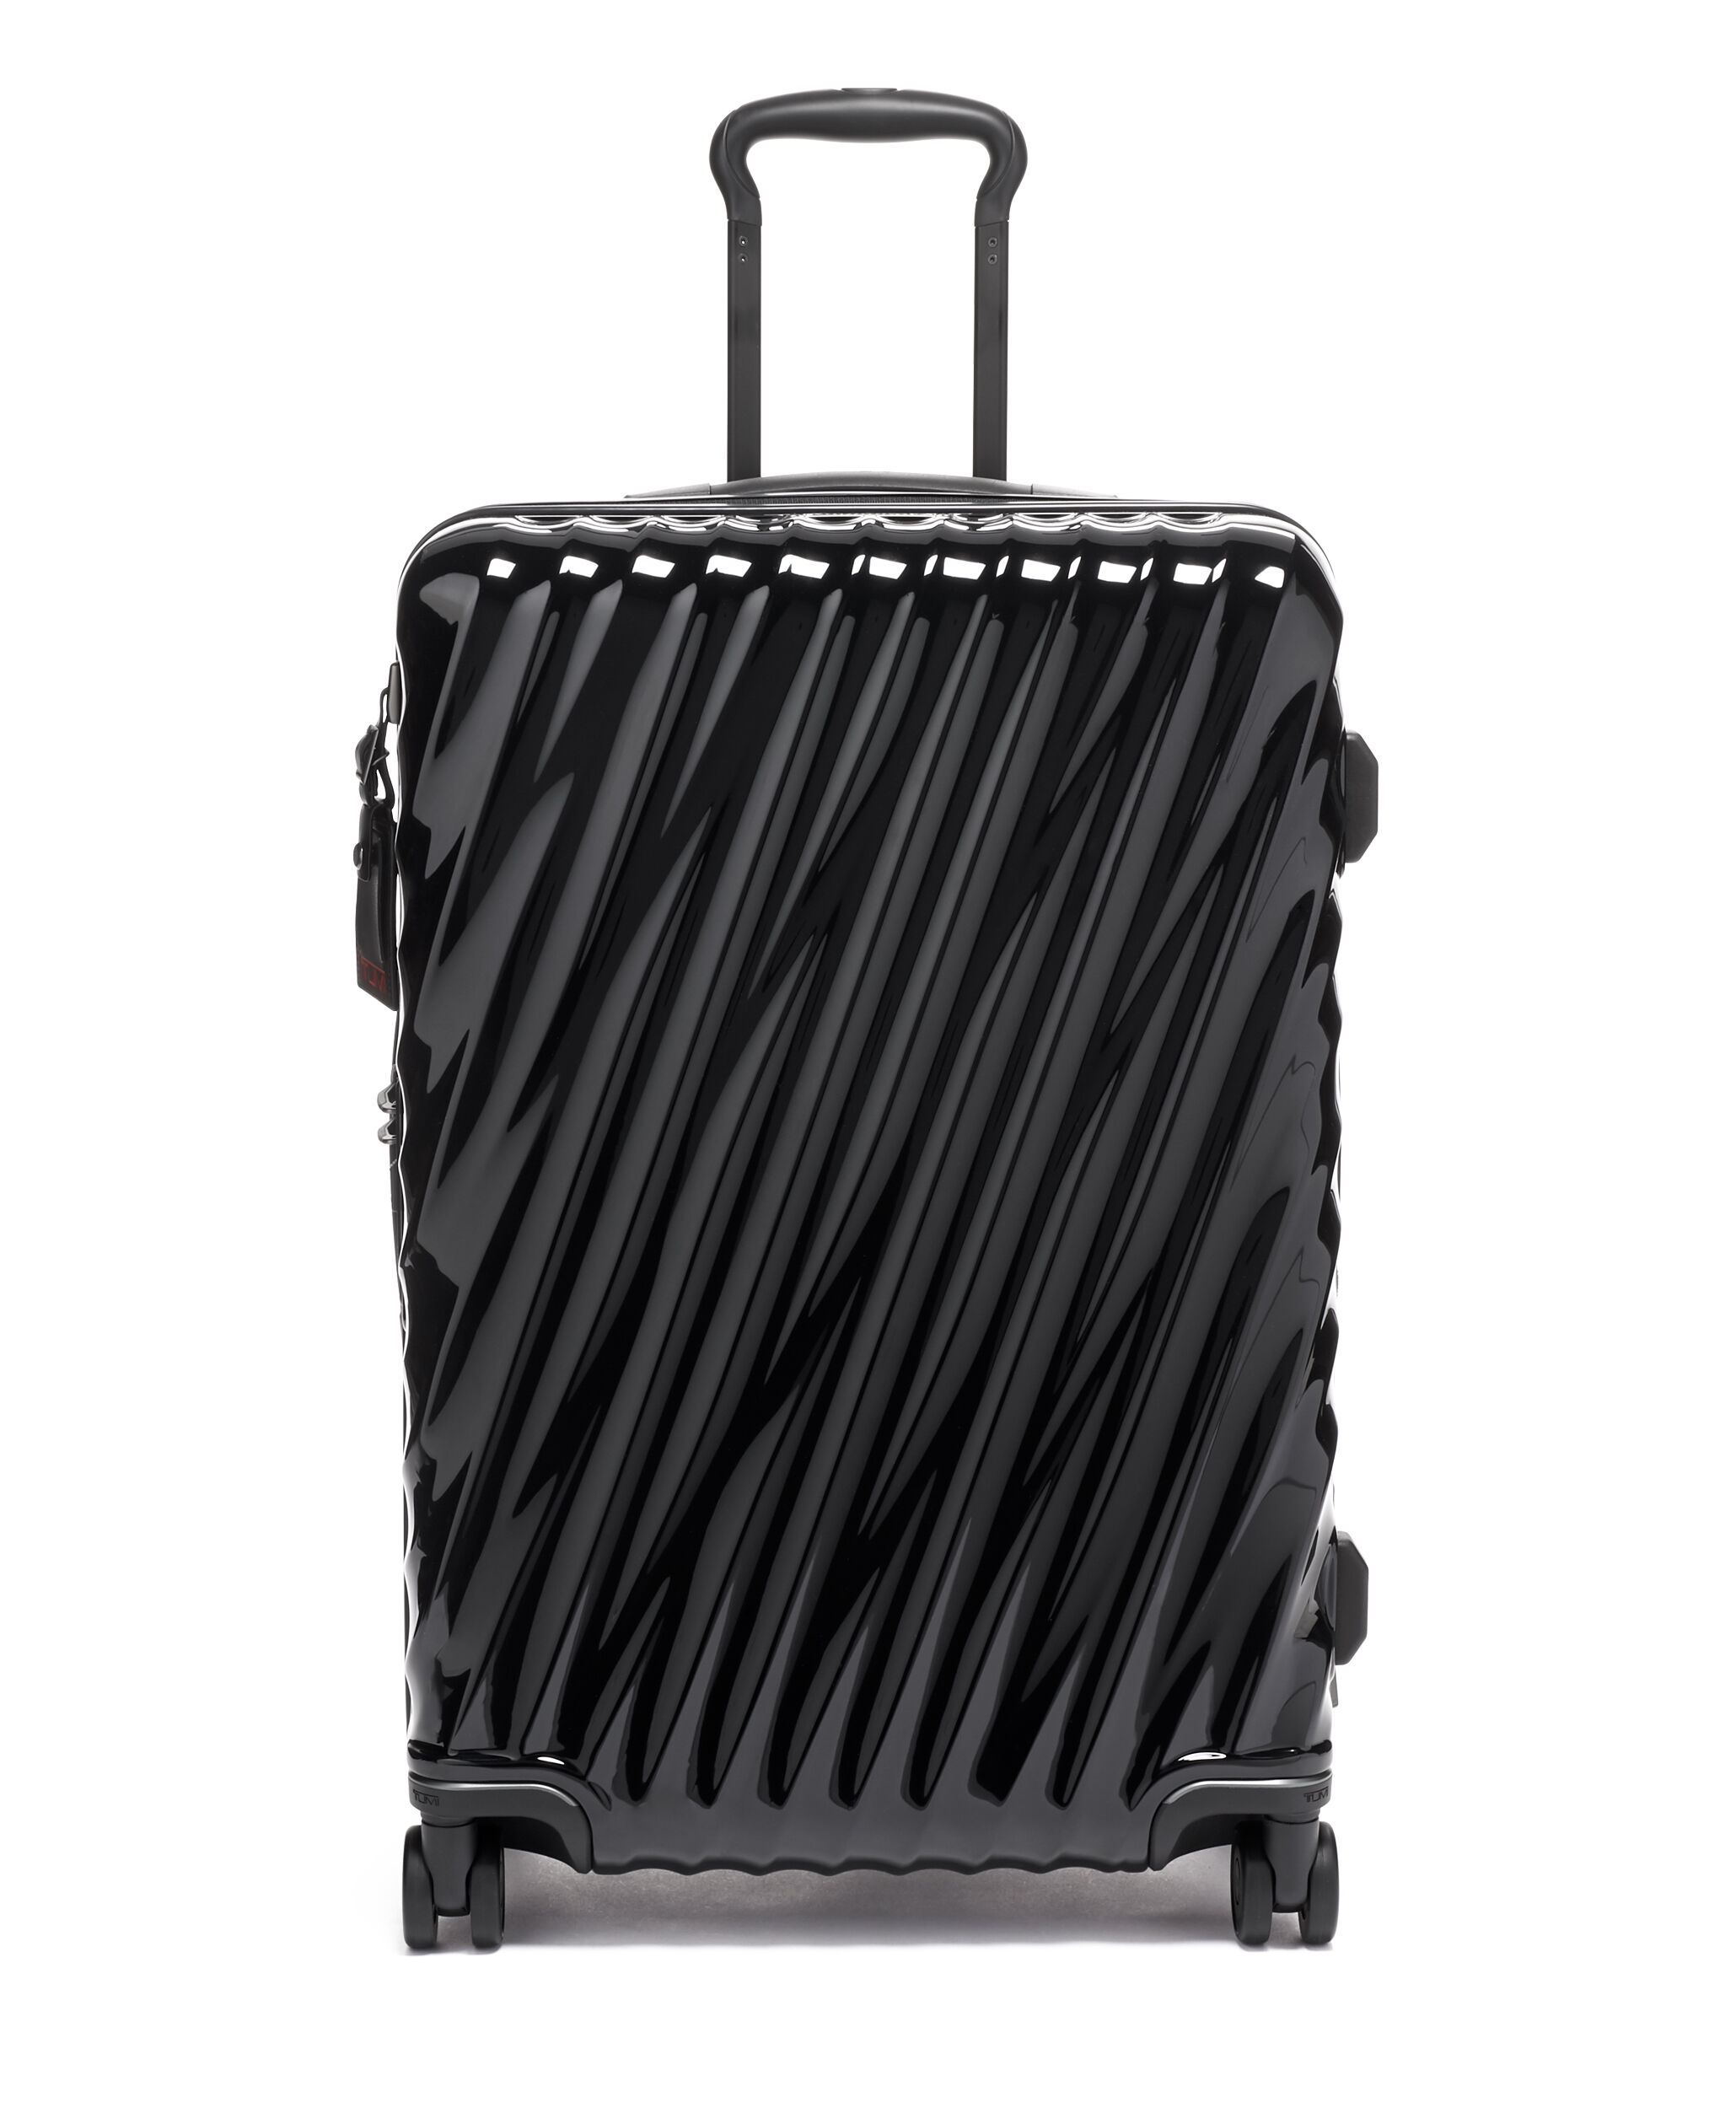 19 Degree Short Trip Expandable Checked Luggage 66 cm